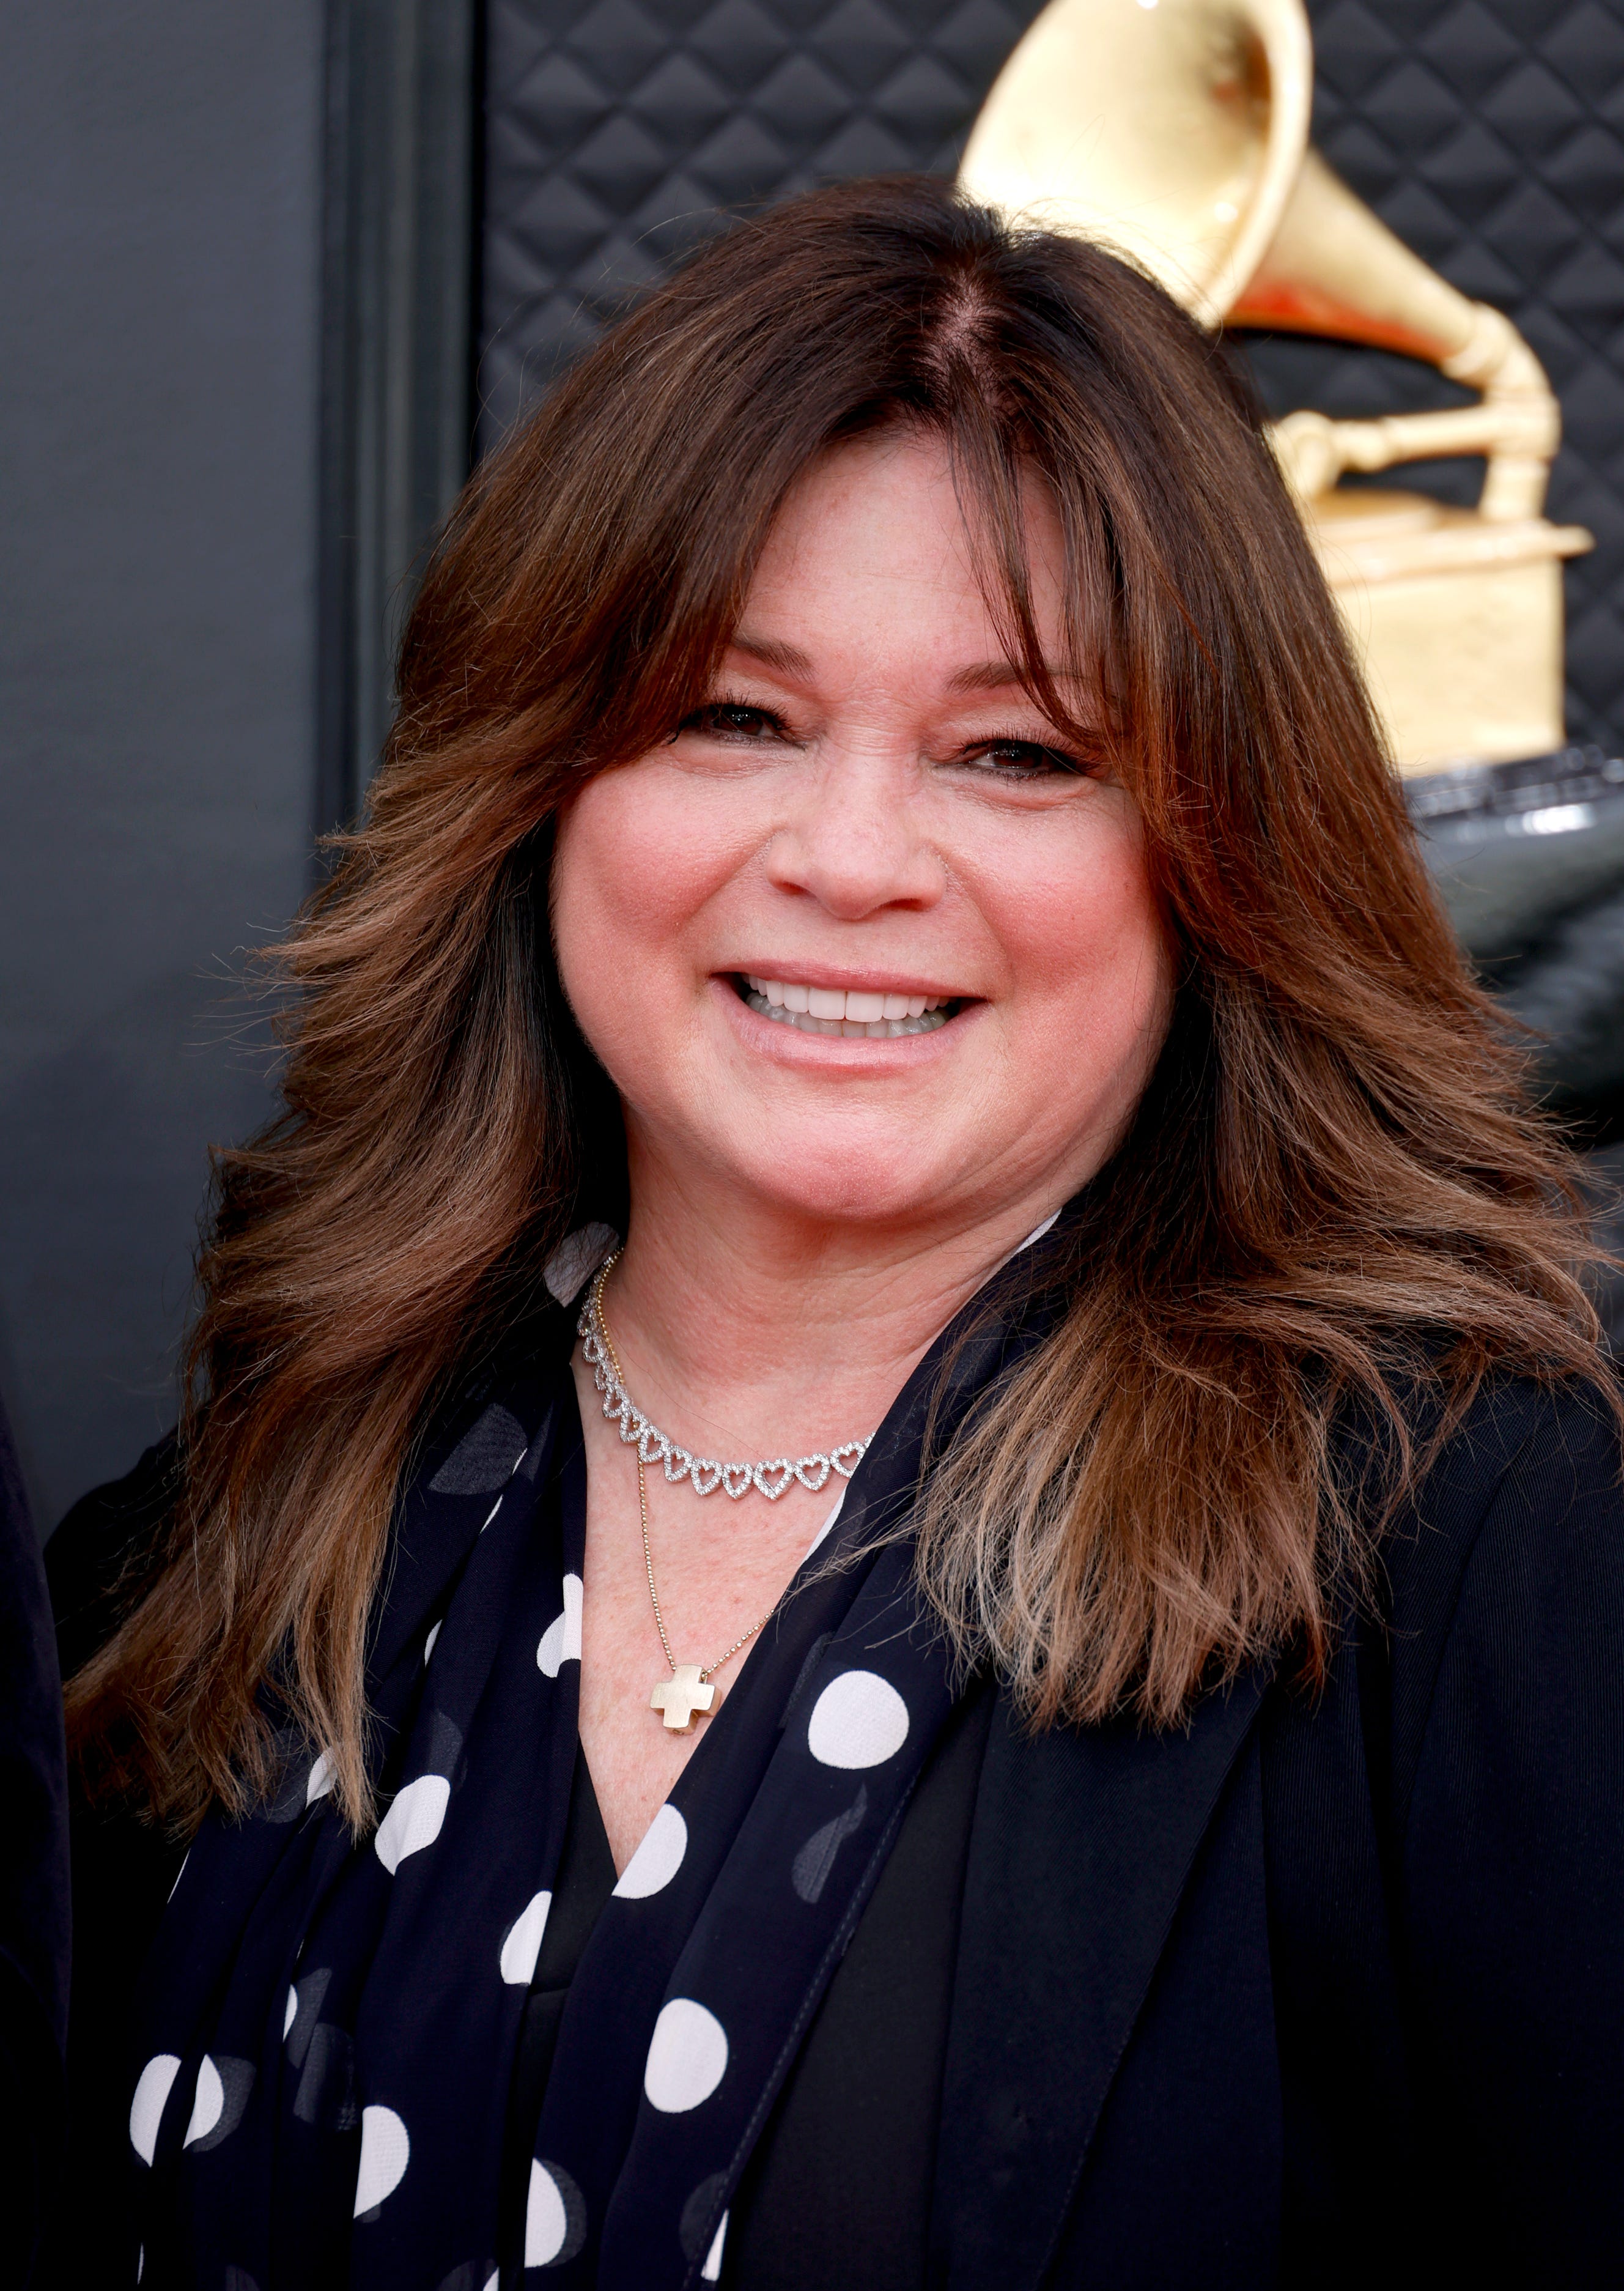 Valerie Bertinelli says she's 'happy' to potentially 'spend the rest of my life alone' after second divorce